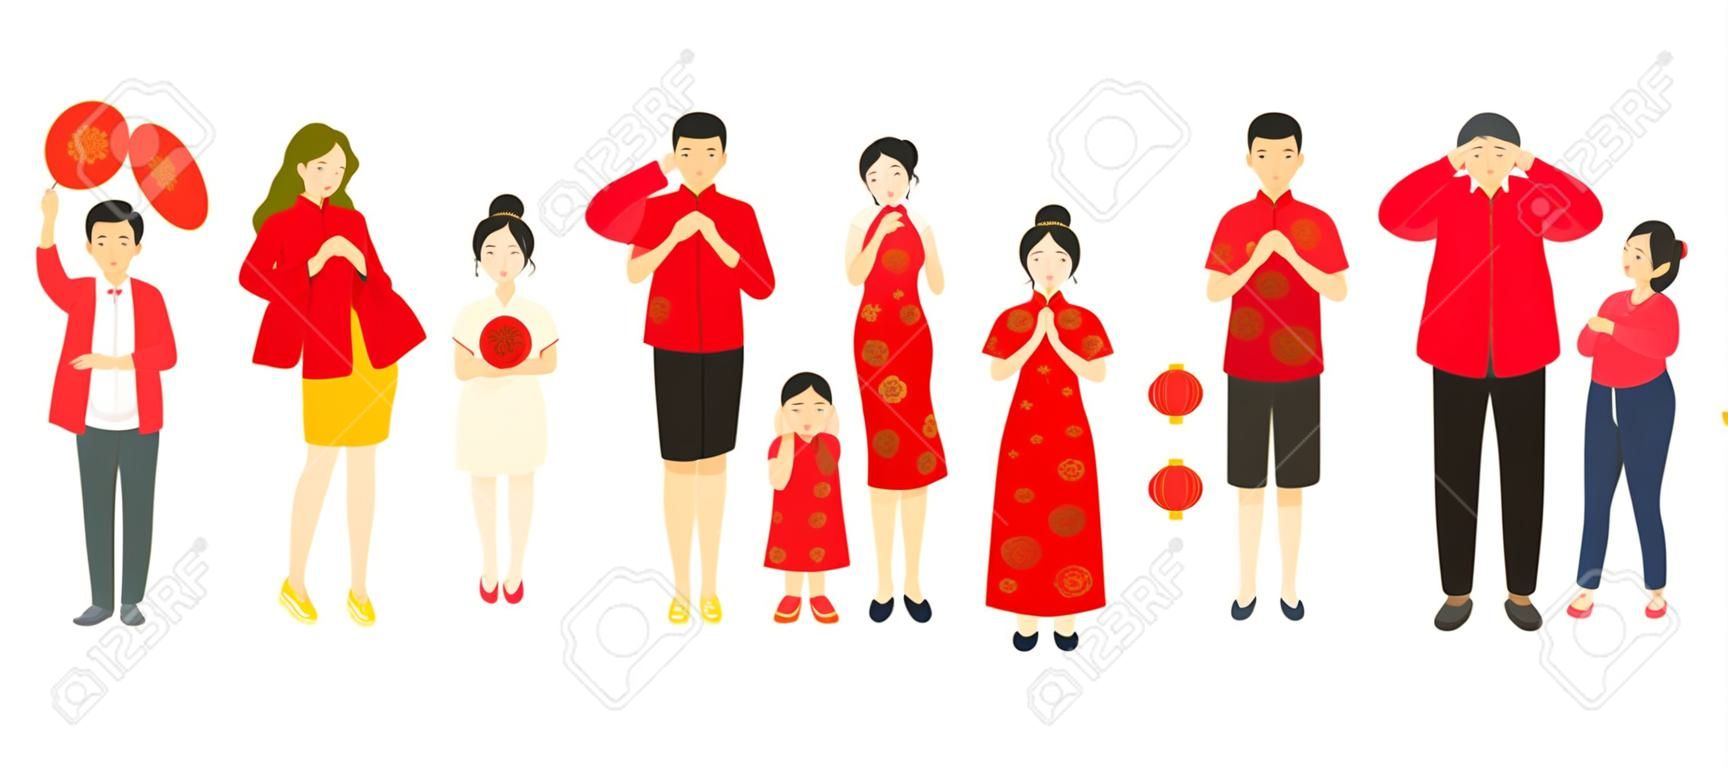 Group of People in Red Clothes, Chinese New Year, Traditional and Modern Clothes, Men and Women